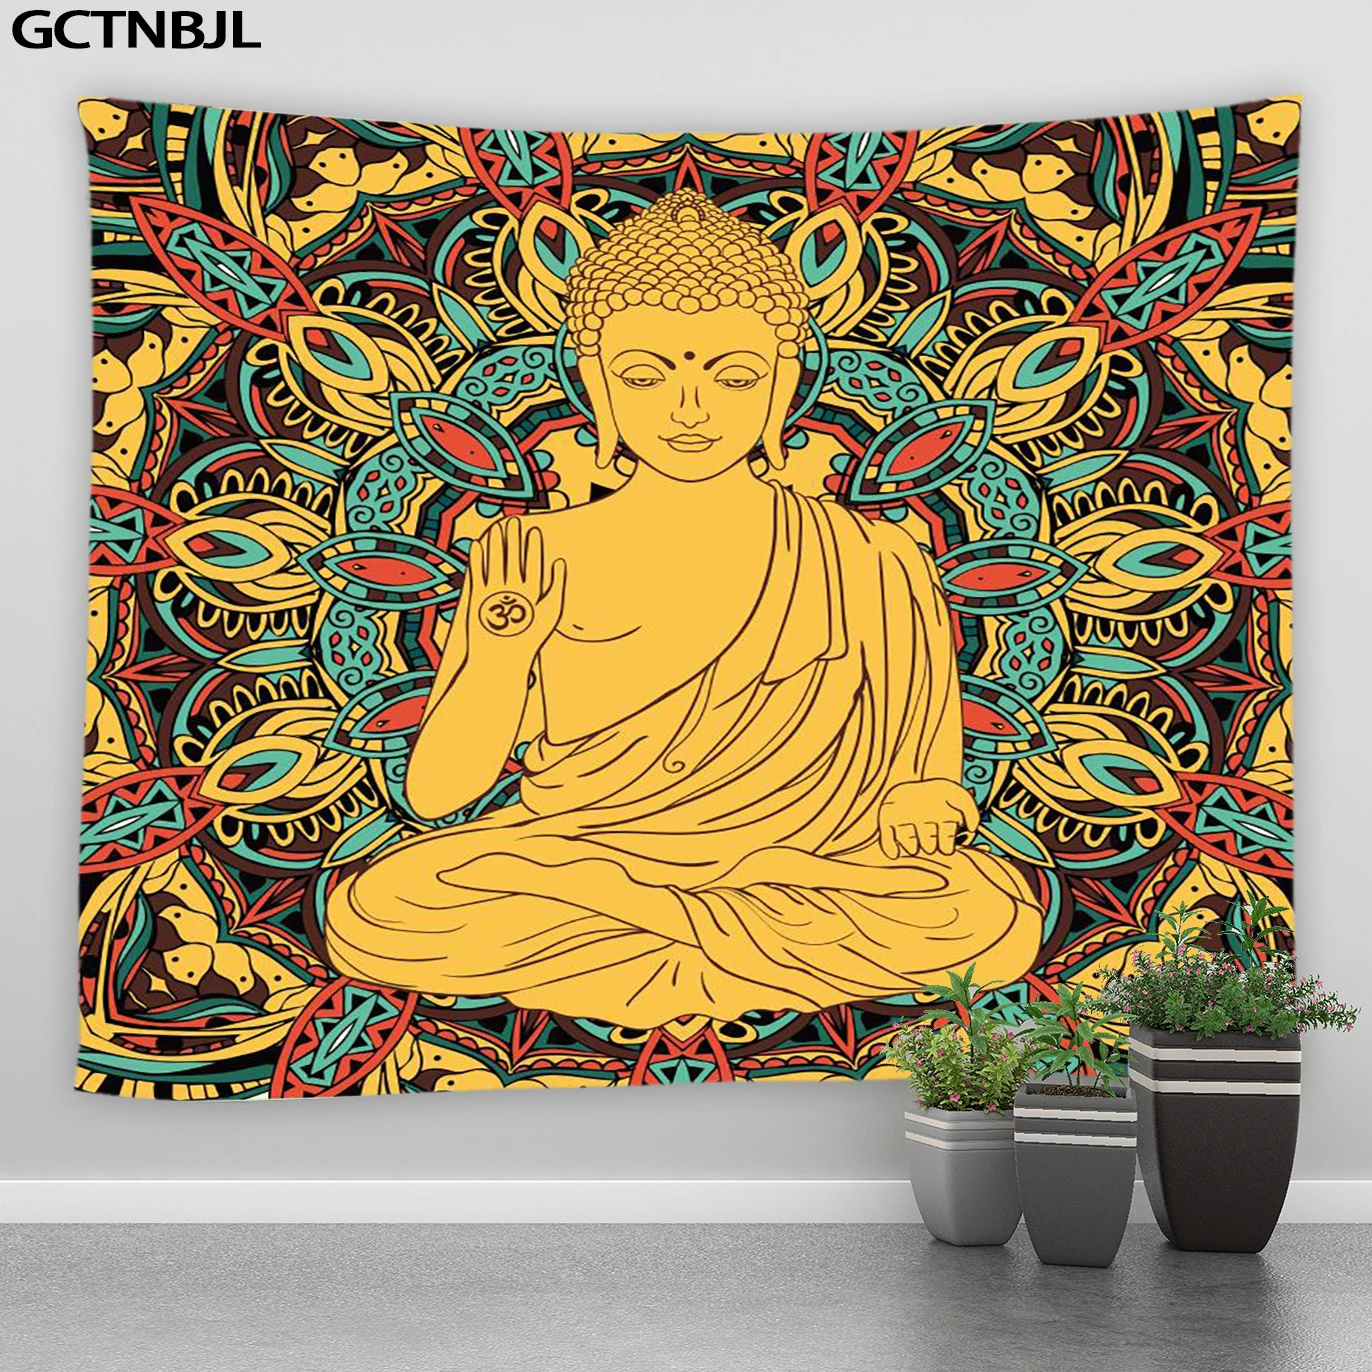 

Indian Buddha Statue Ancient Buddhist Tapestry Living Room Bedroom Wall Meditation Psychedelic Yoga Wall Hanging Hippie Bohemian